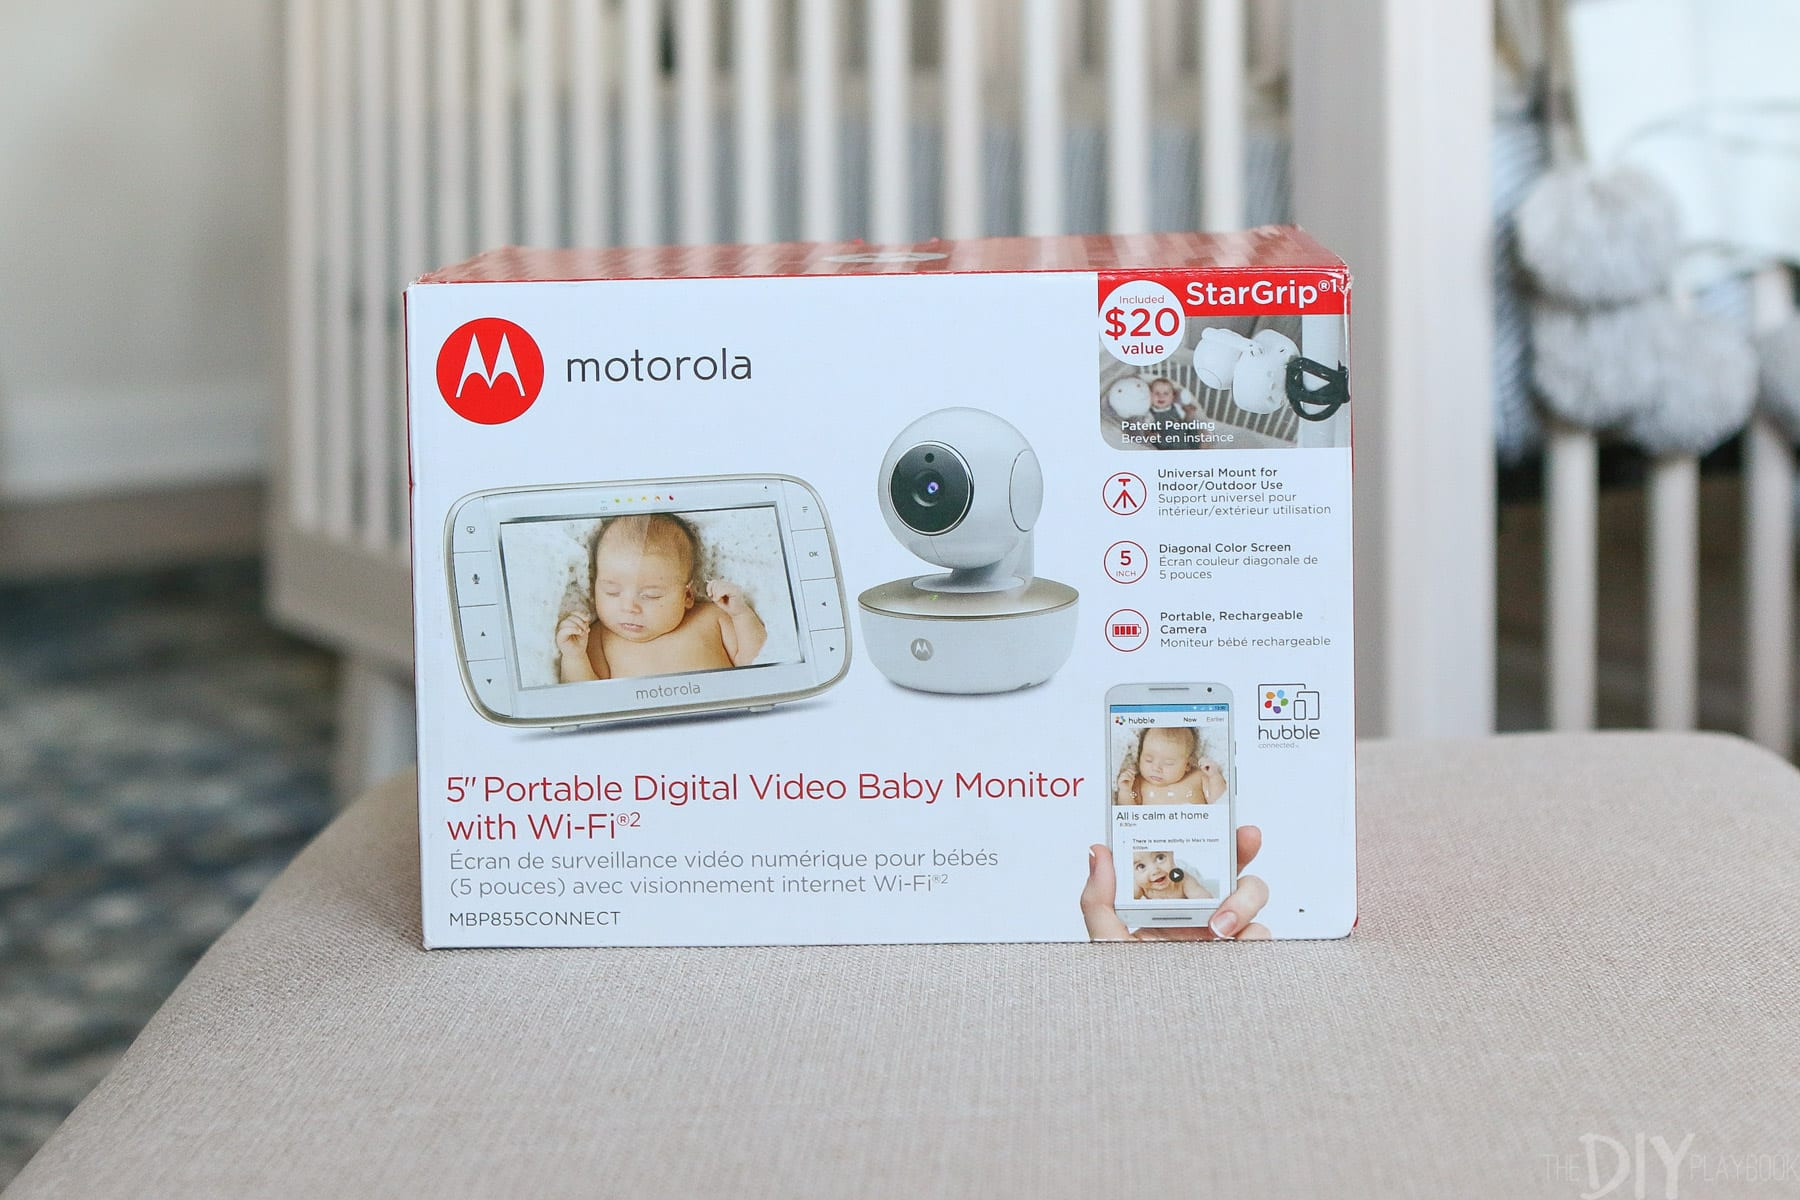 Diy Video Baby Monitor
 How to Mount a Baby Monitor and Hide the Cords The DIY